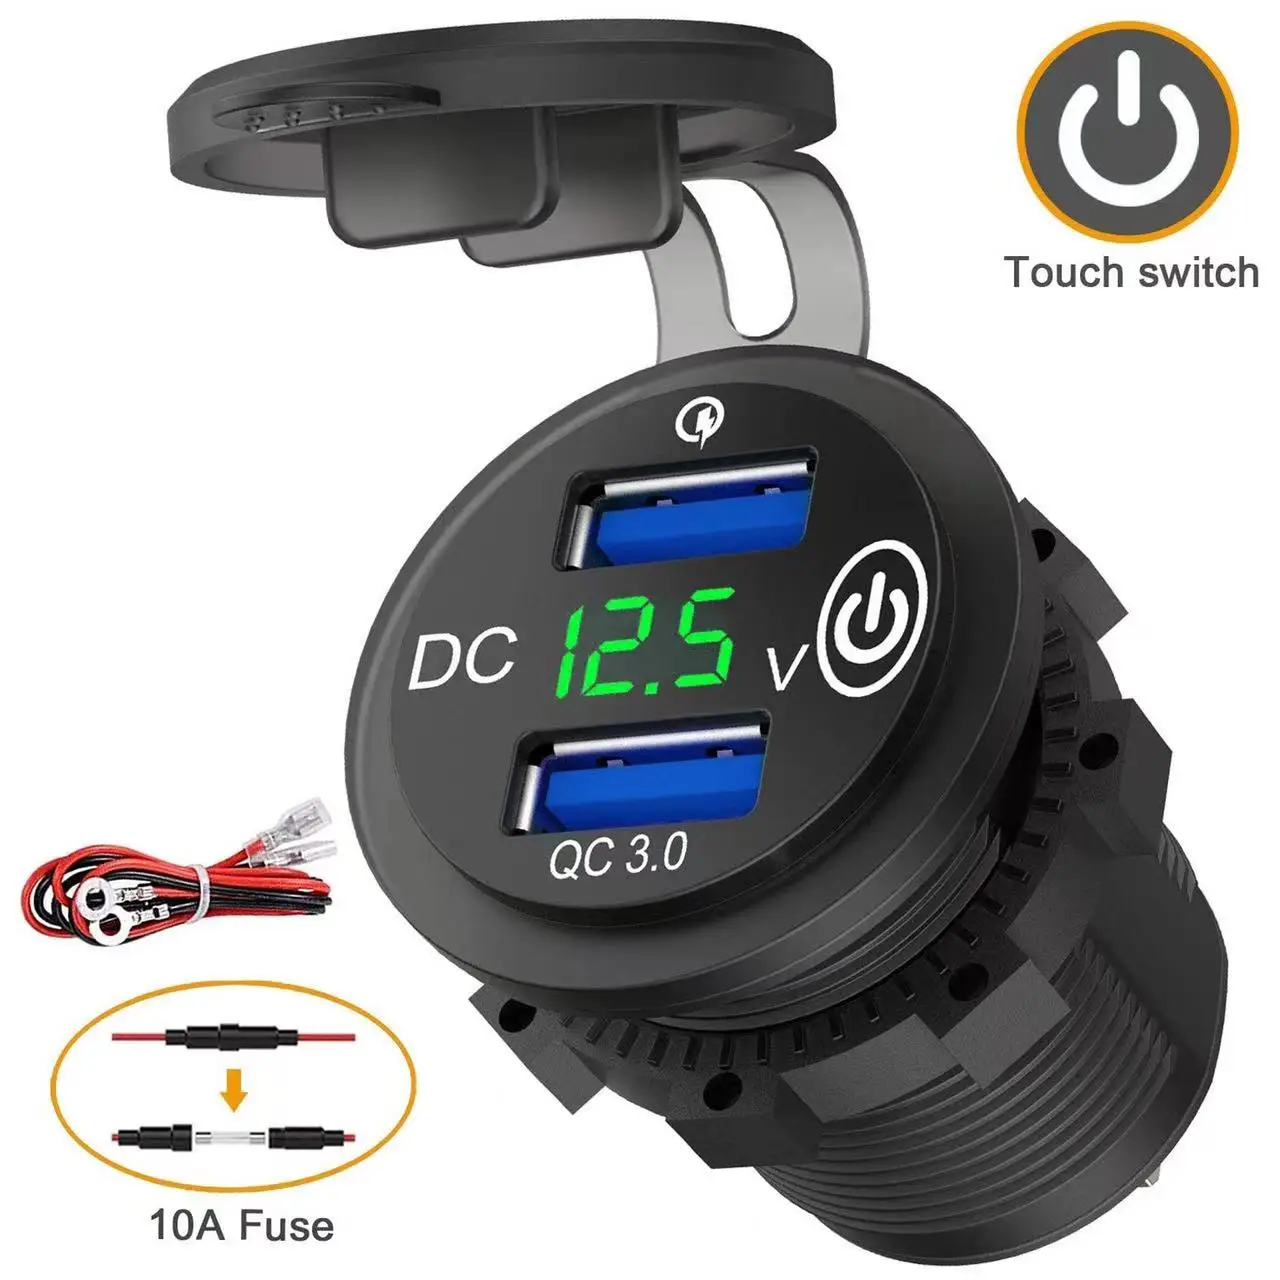 

12V Dual USB Car Charger Quick Charge QC3.0 Socket Power Adaptor with LED Digital Voltmeter Touch Switch for Mobile Phone